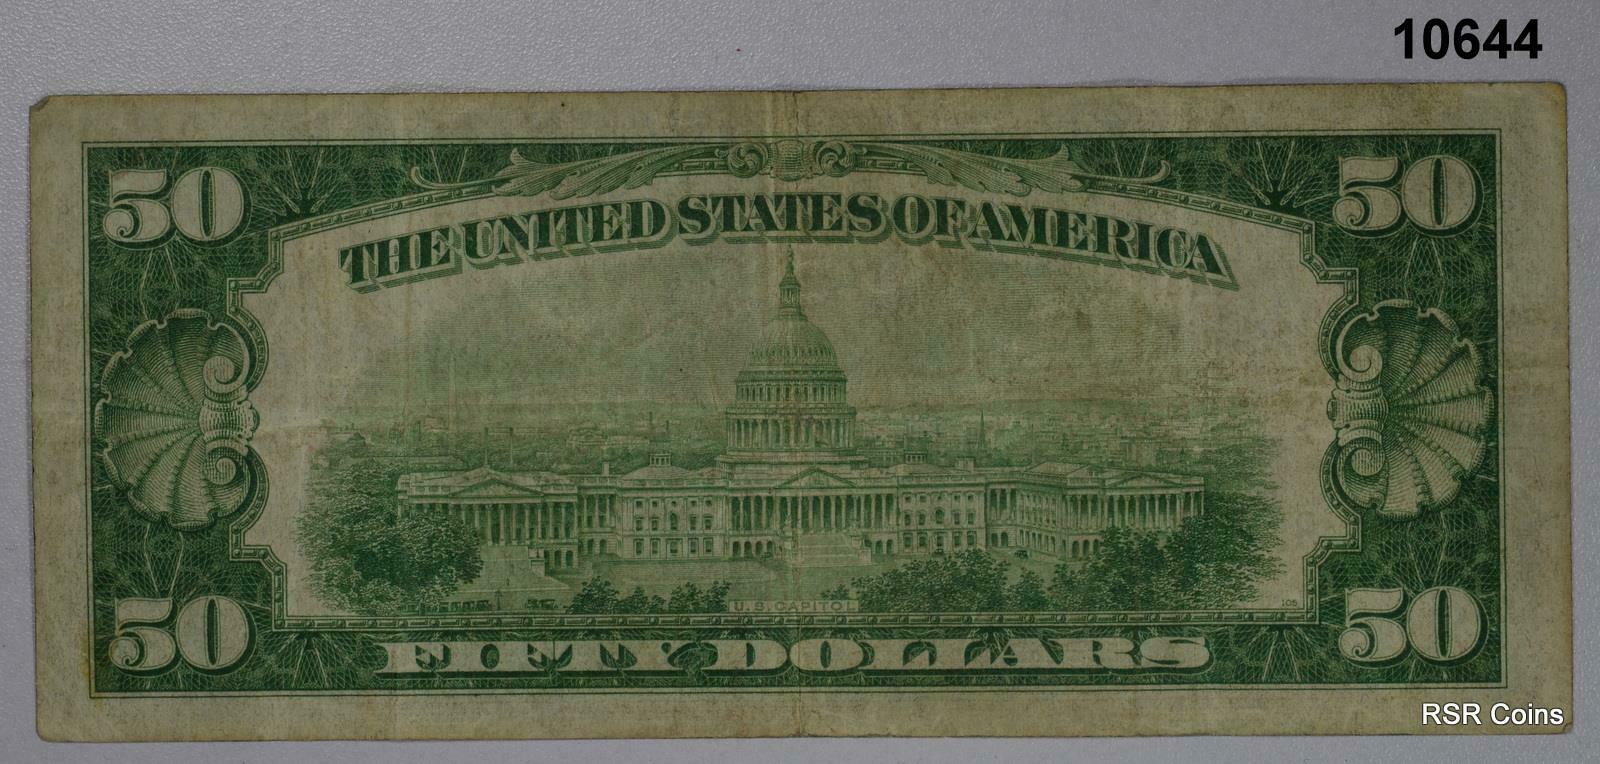 1934 $50 FEDERAL RESERVE NOTE NEW YORK #10644